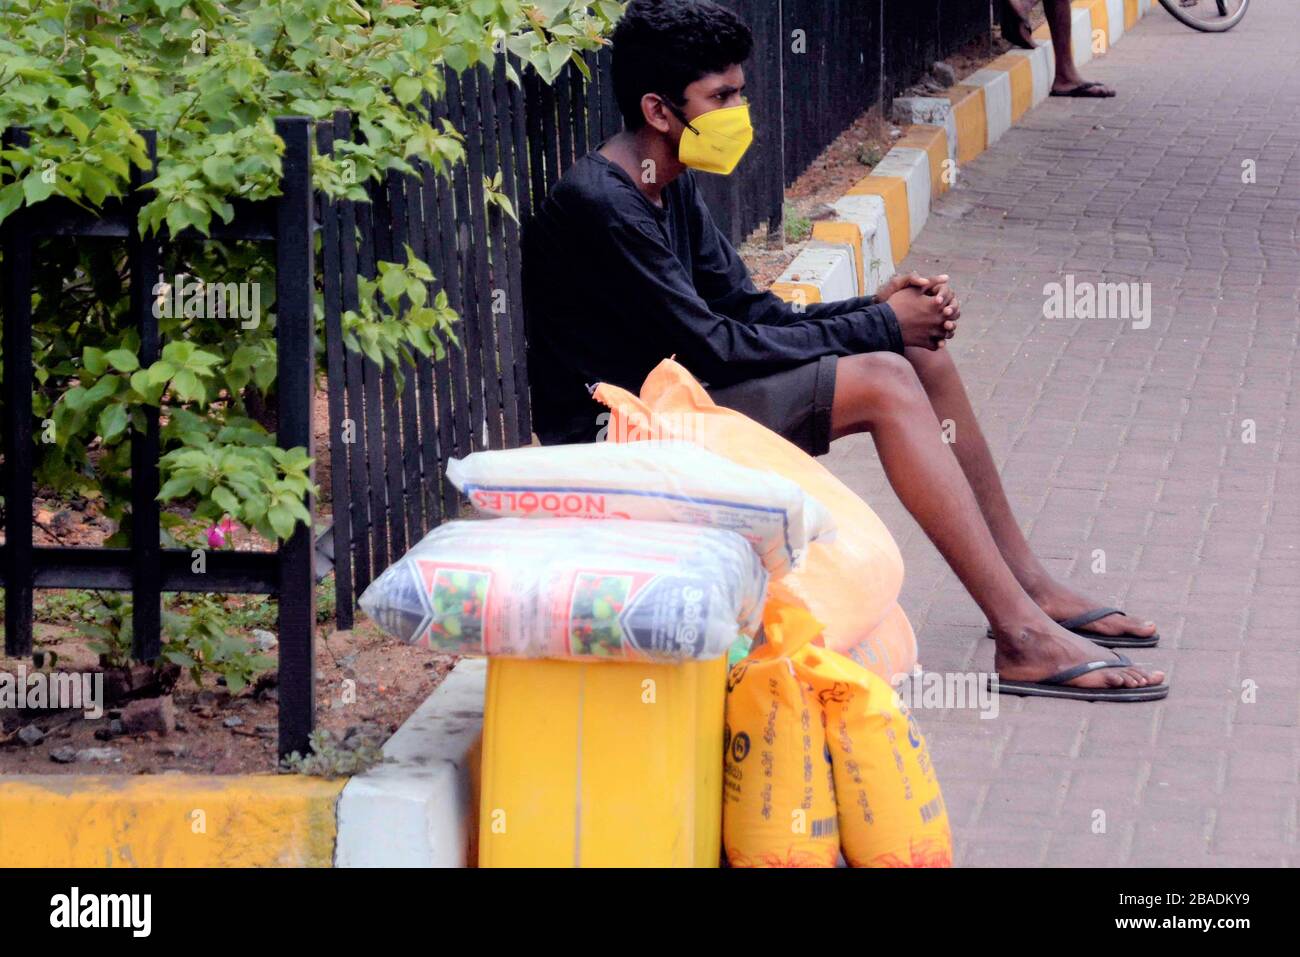 Colombo, Sri Lanka. 26th Mar, 2020. A young boy waits for a vehicle after he purchased goods in Colombo, Sri Lanka, March 26, 2020. Sri Lanka's capital Colombo, Gampaha and remained